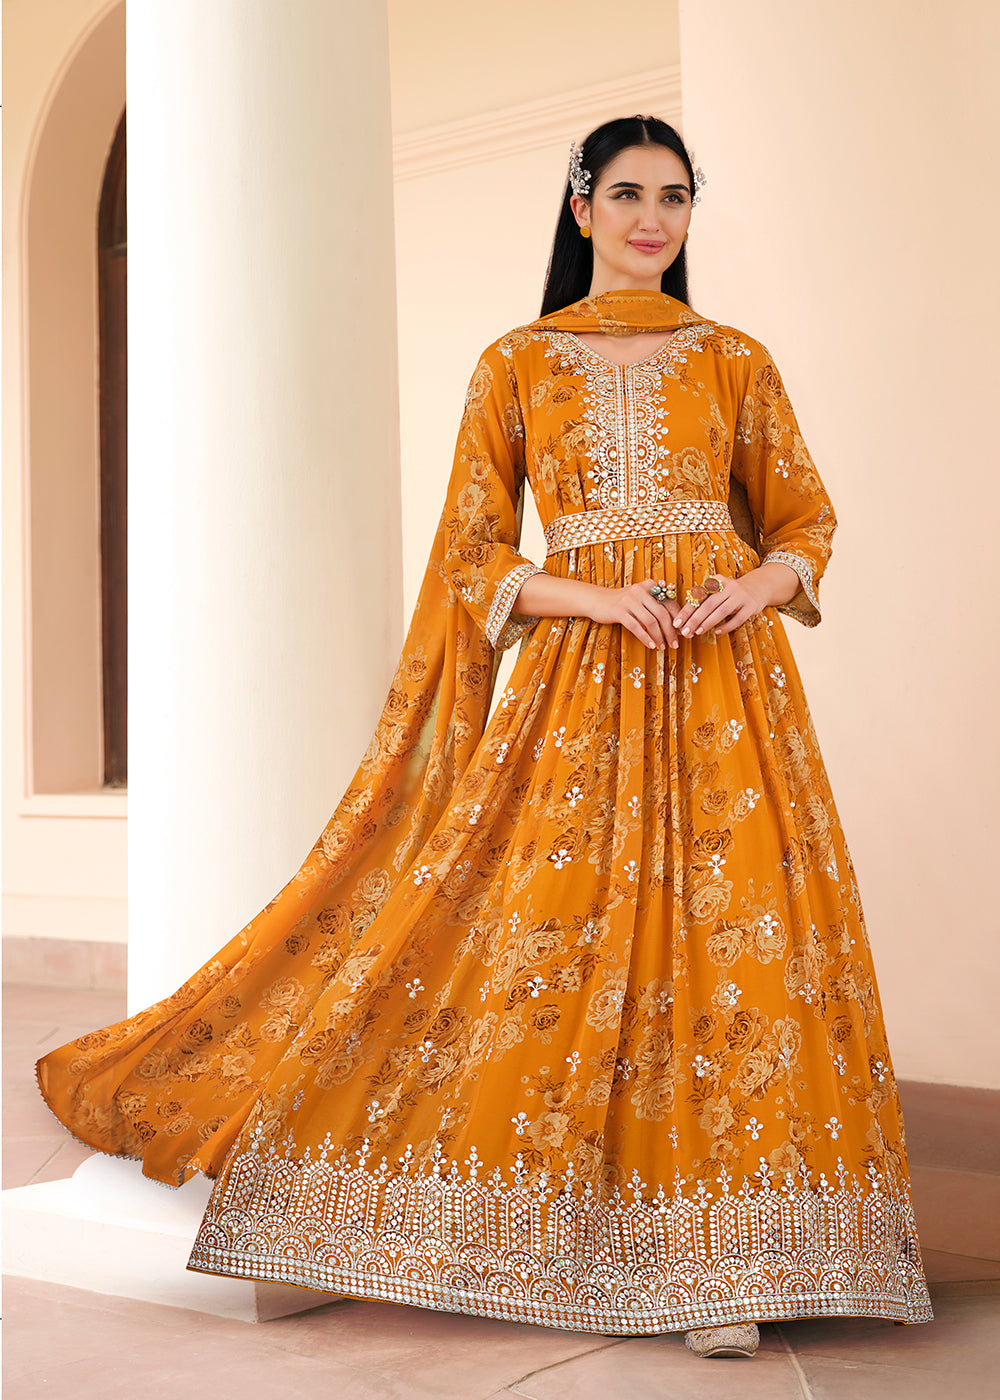 Buy Now Mustard Floral Digital Printed & Embroidered Festive Anarkali Gown Online in USA, UK, Australia, New Zealand, Canada & Worldwide at Empress Clothing. 